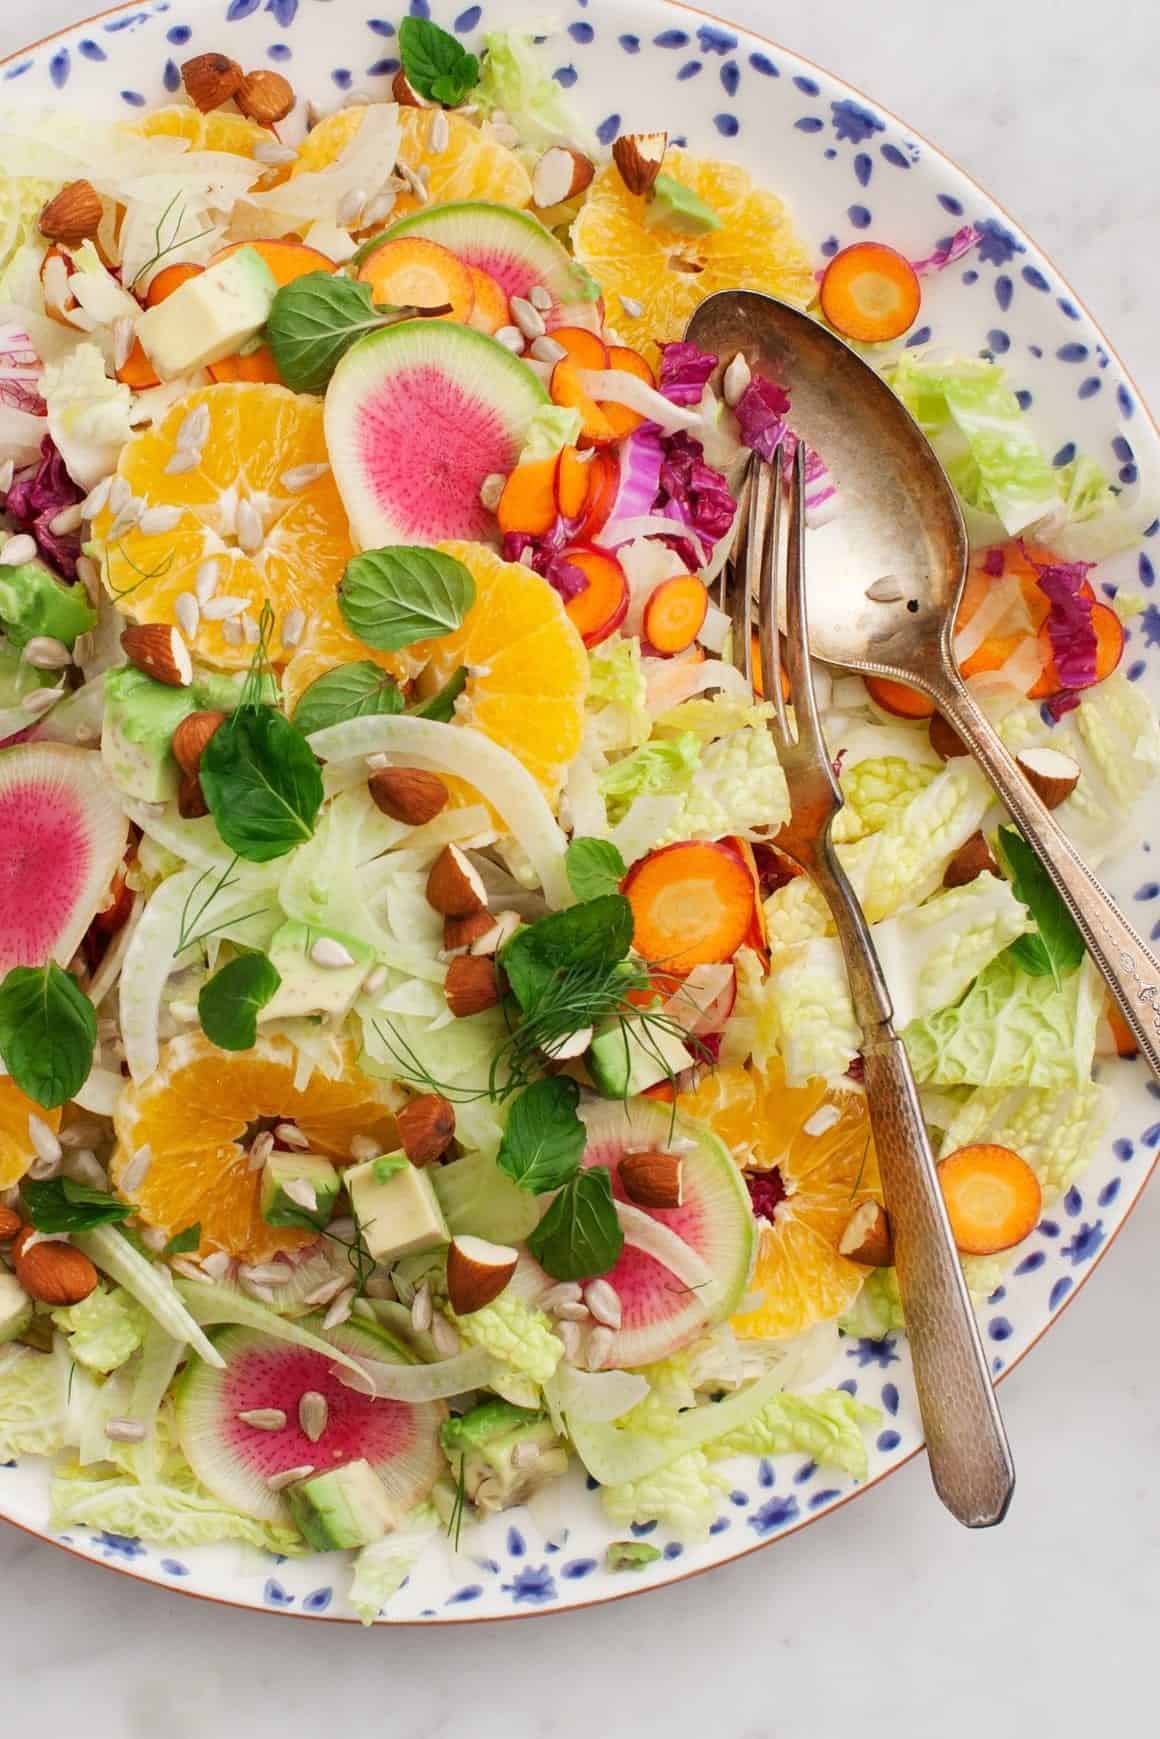 Fennel & Clementine Chopped Salad